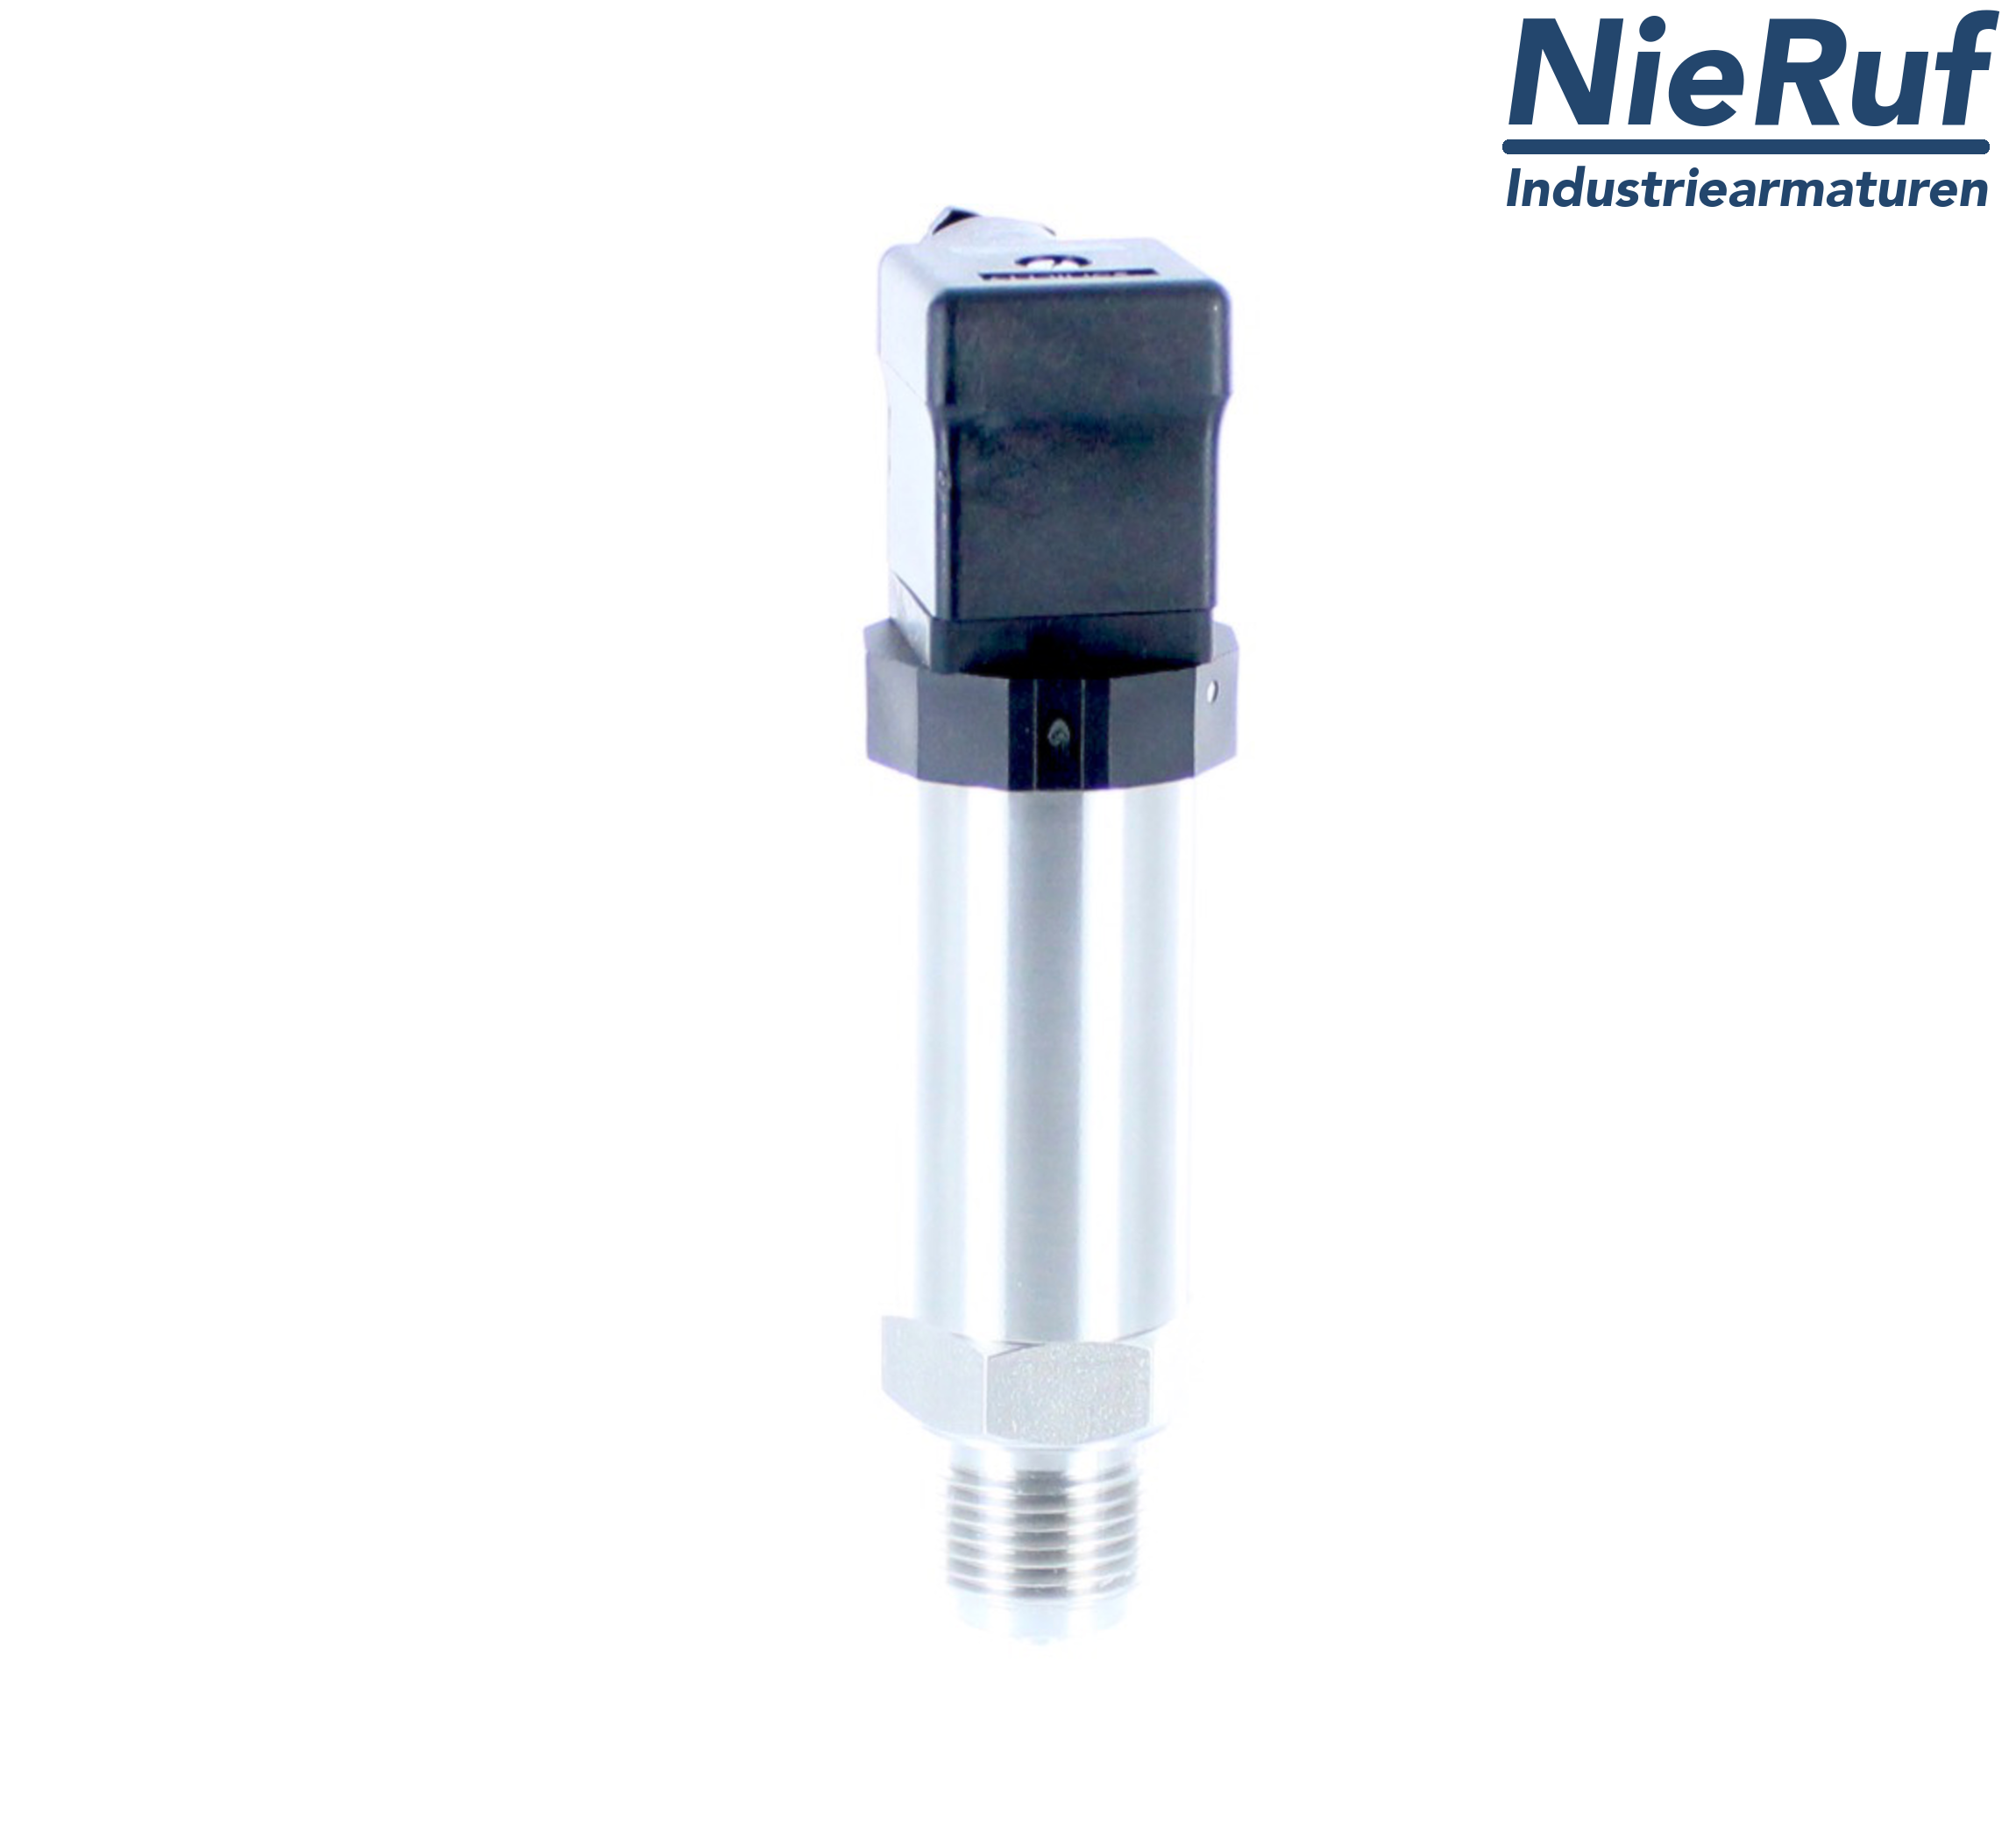 pressure sensor G 1/4" B DS01 stainless steel 2-wire: 4-20mA FPM 0,0 - 6,0 bar